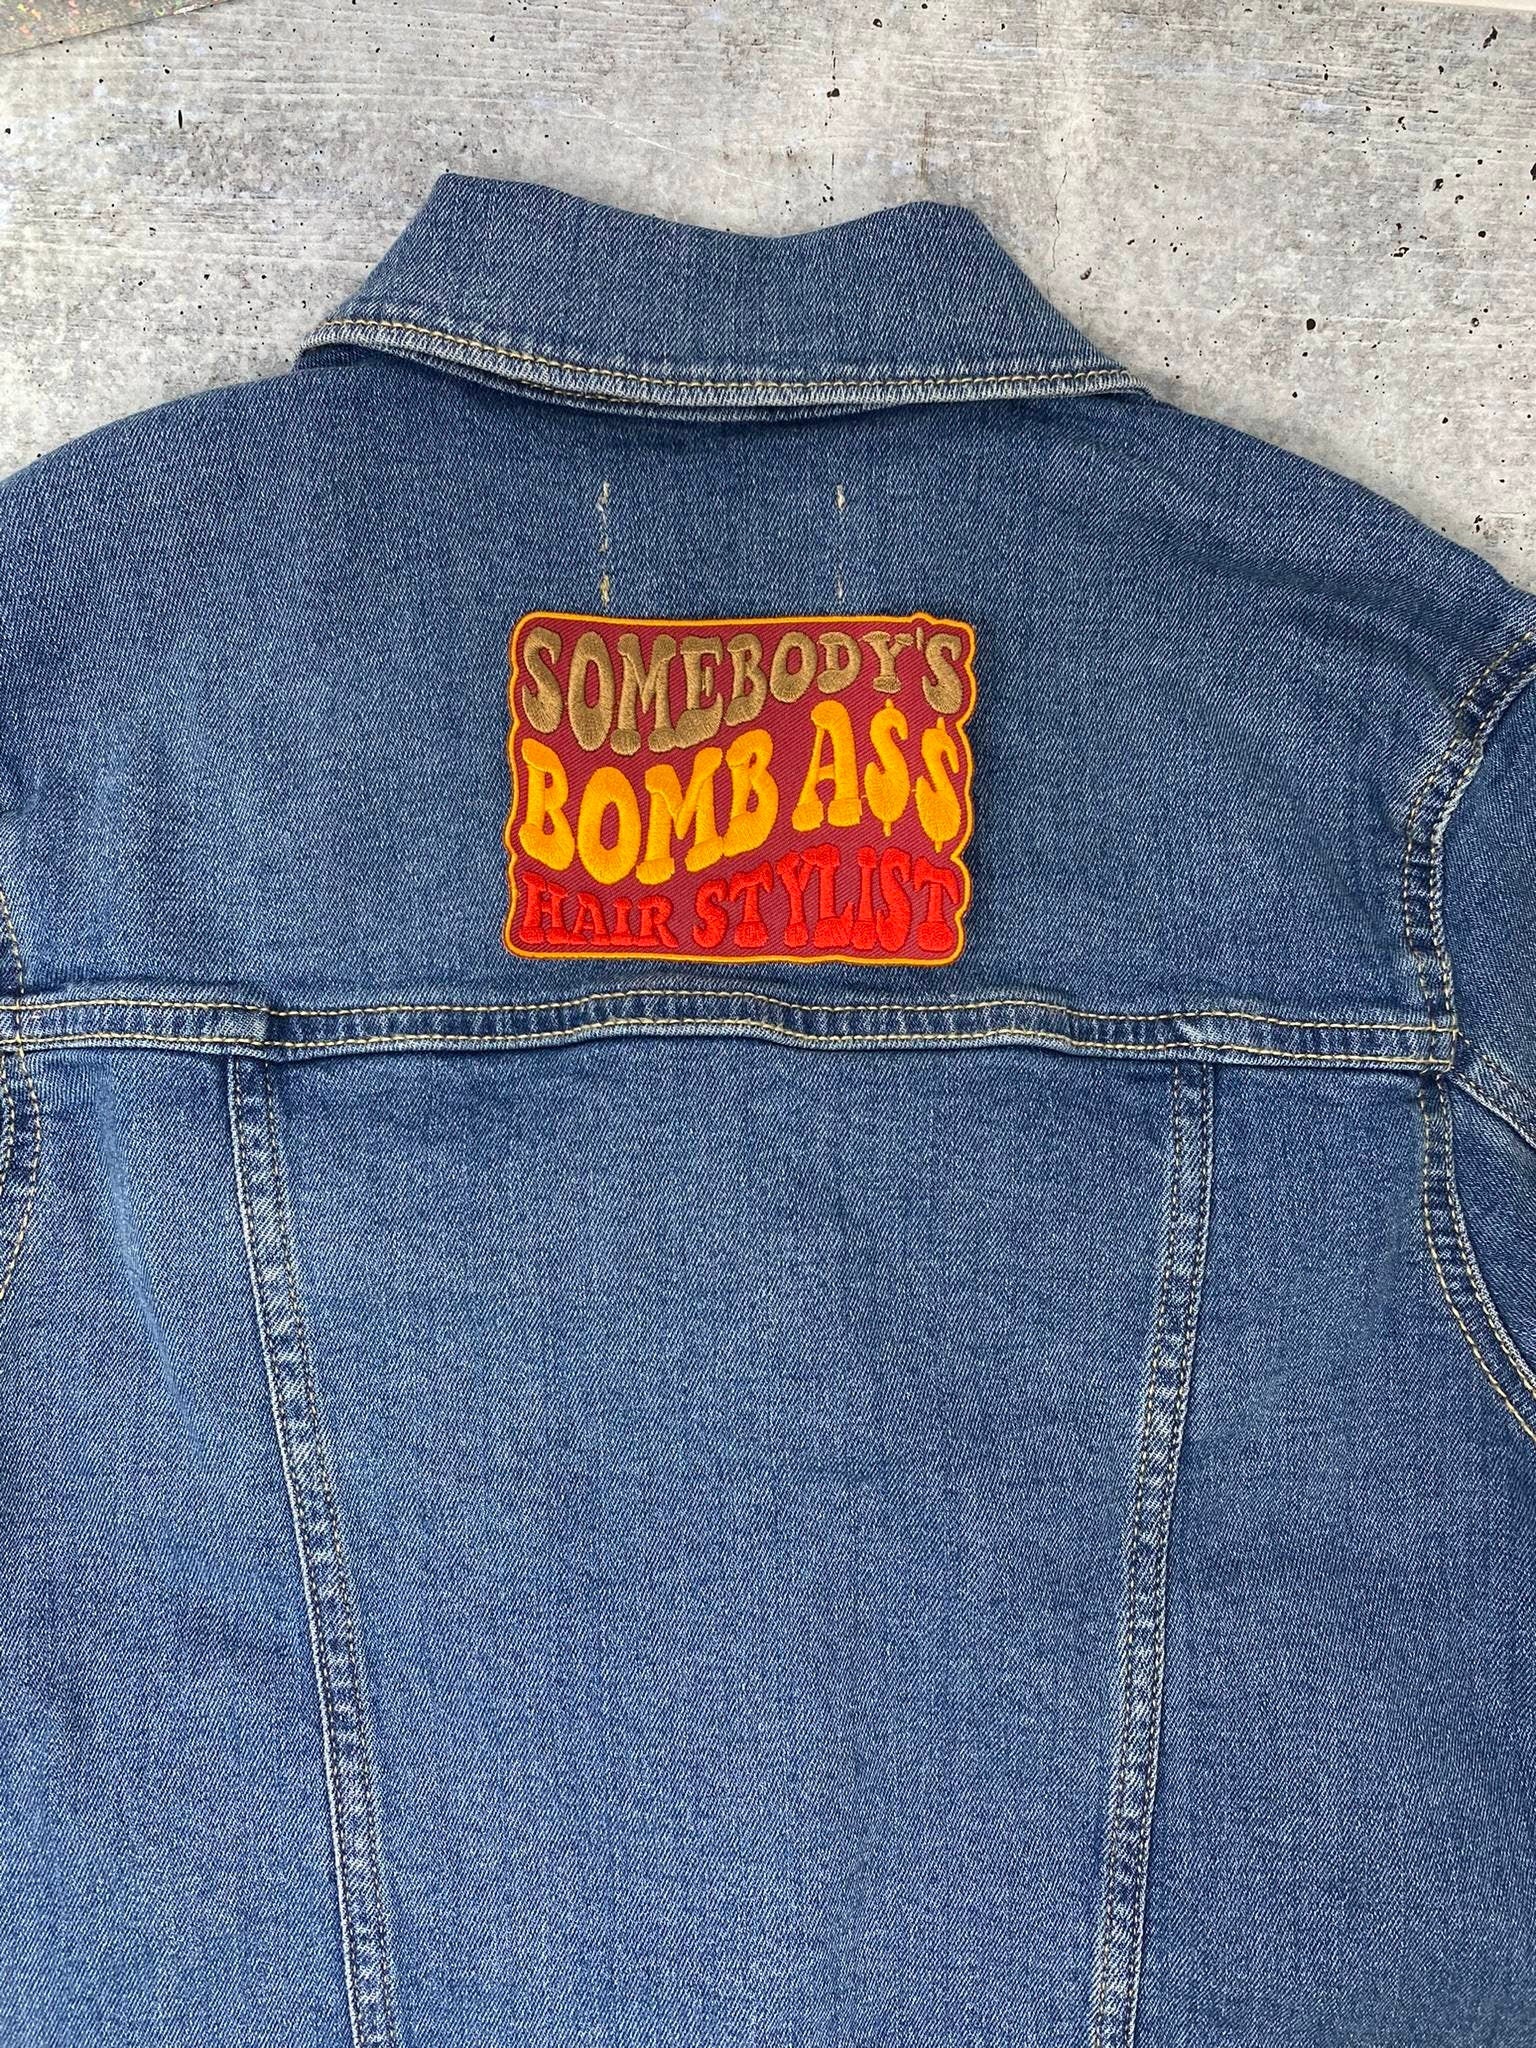 New, "Somebody's Bomb Ass HAIR STYLIST" 1-pc, Iron-on Embroidered Patch, Cute Patch for Jackets, Hats, Crocs, Gifts for Stylist, Funny Gifts